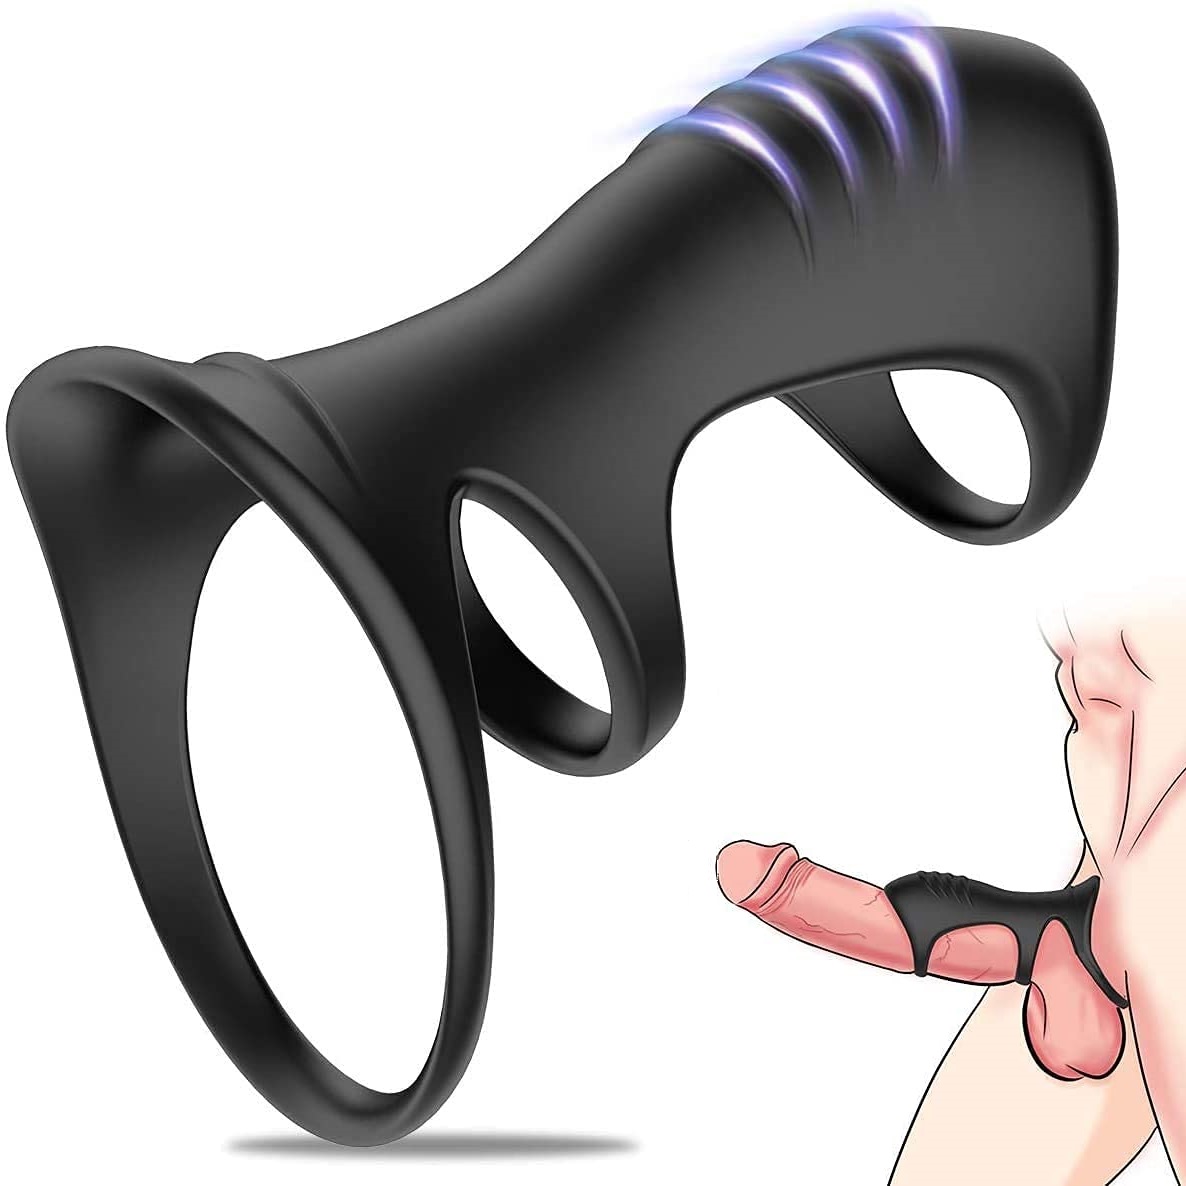 Silicone Dual Penis Ring,Cock Ring Erection Enhancing Sex Toy for Man or Couples Play